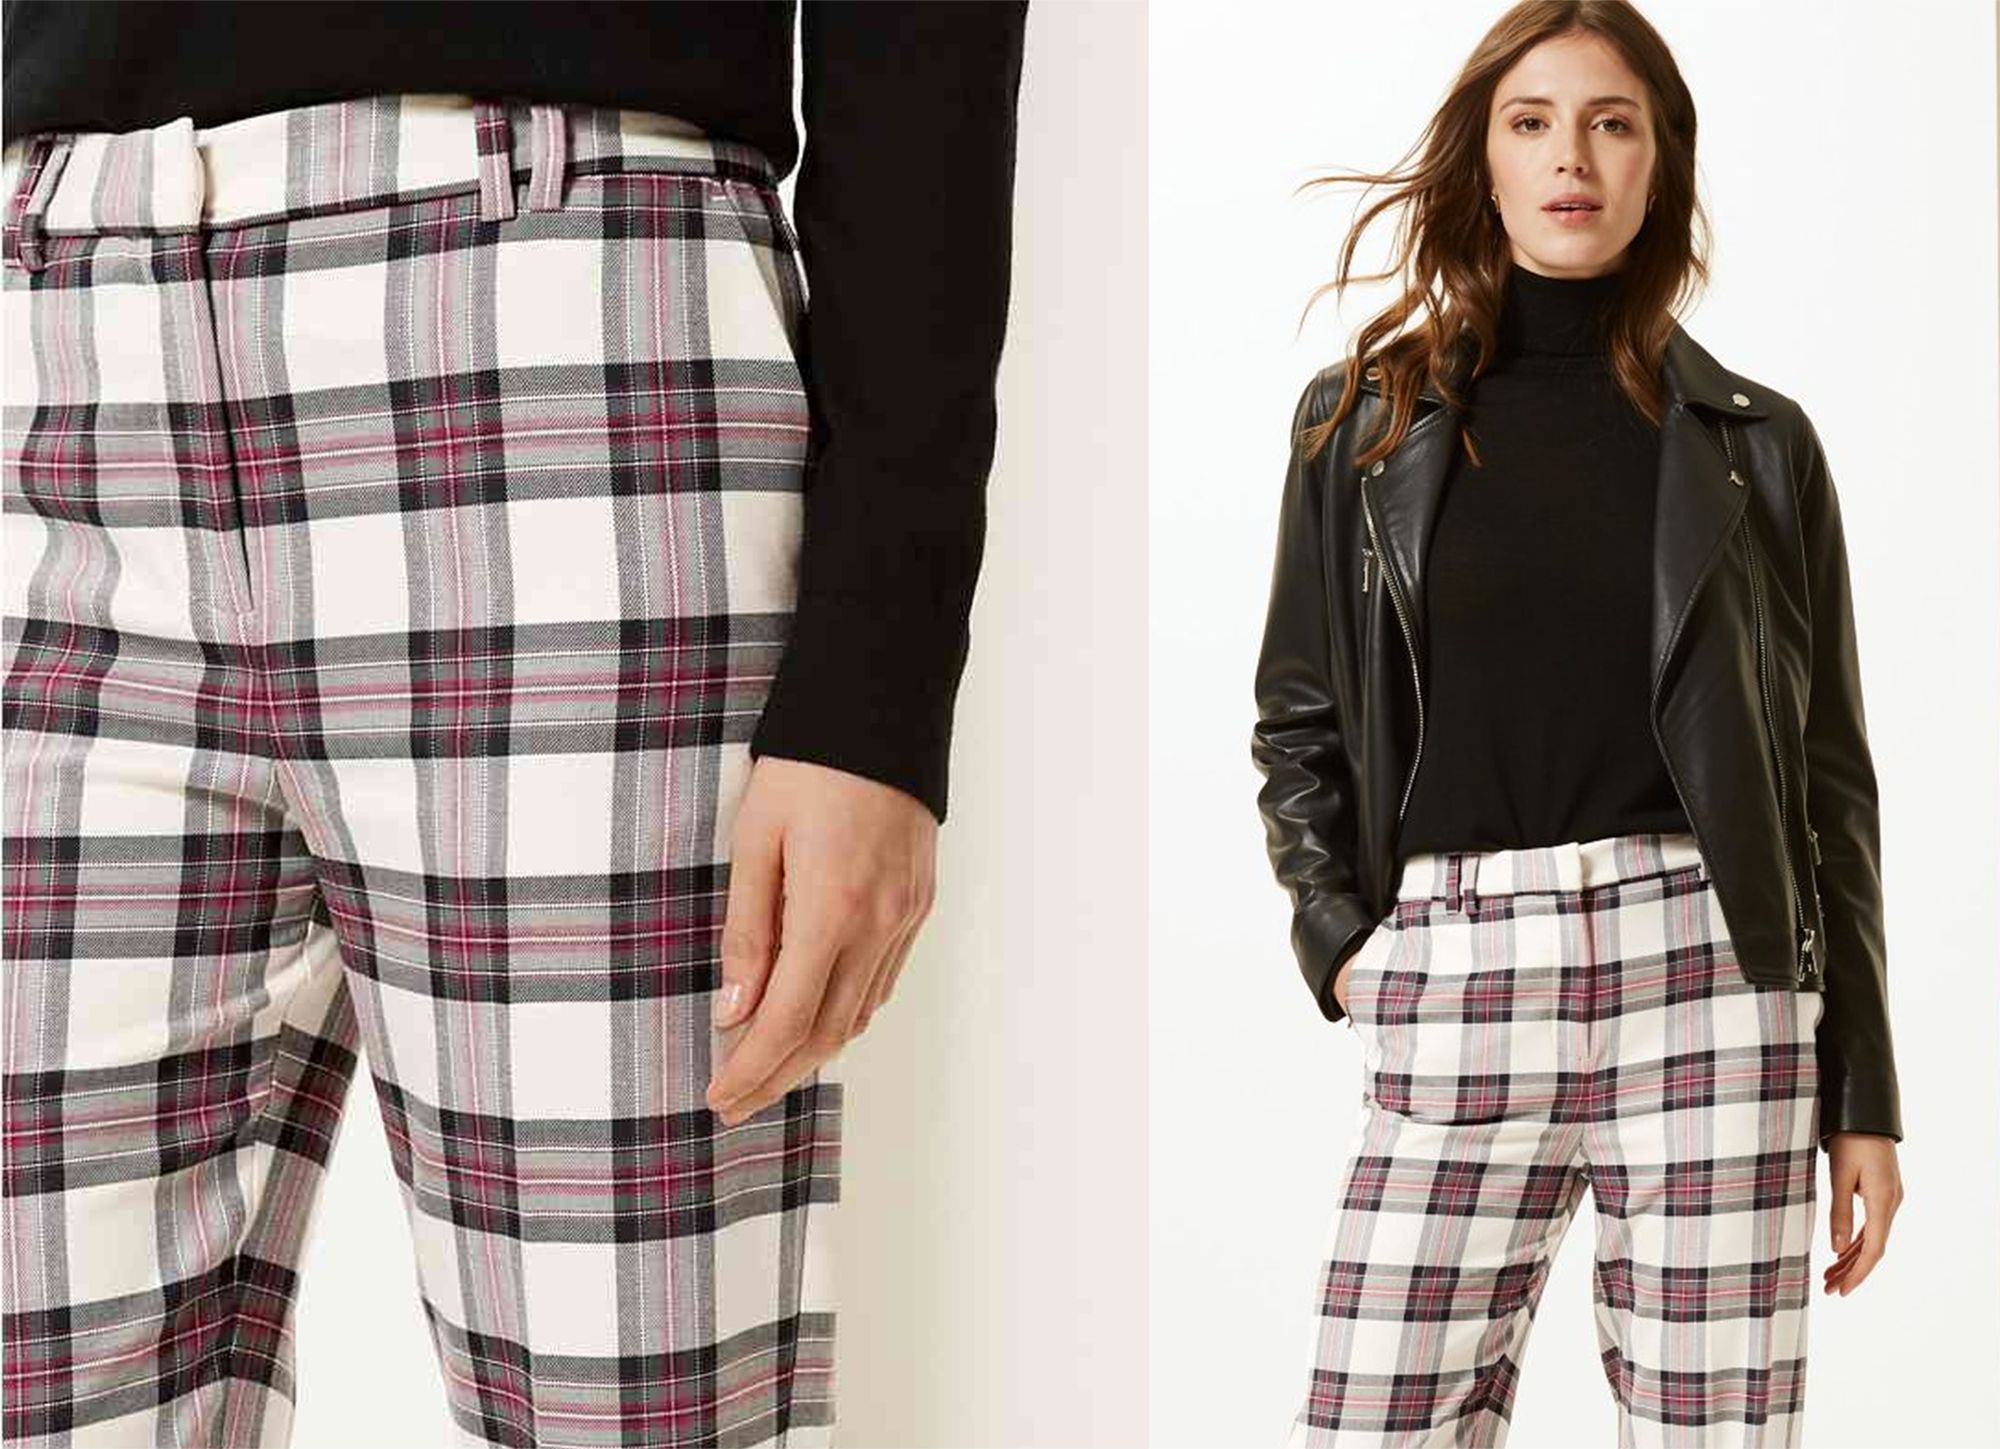 Gladys Checkered women's trousers: for sale at 19.99€ on Mecshopping.it